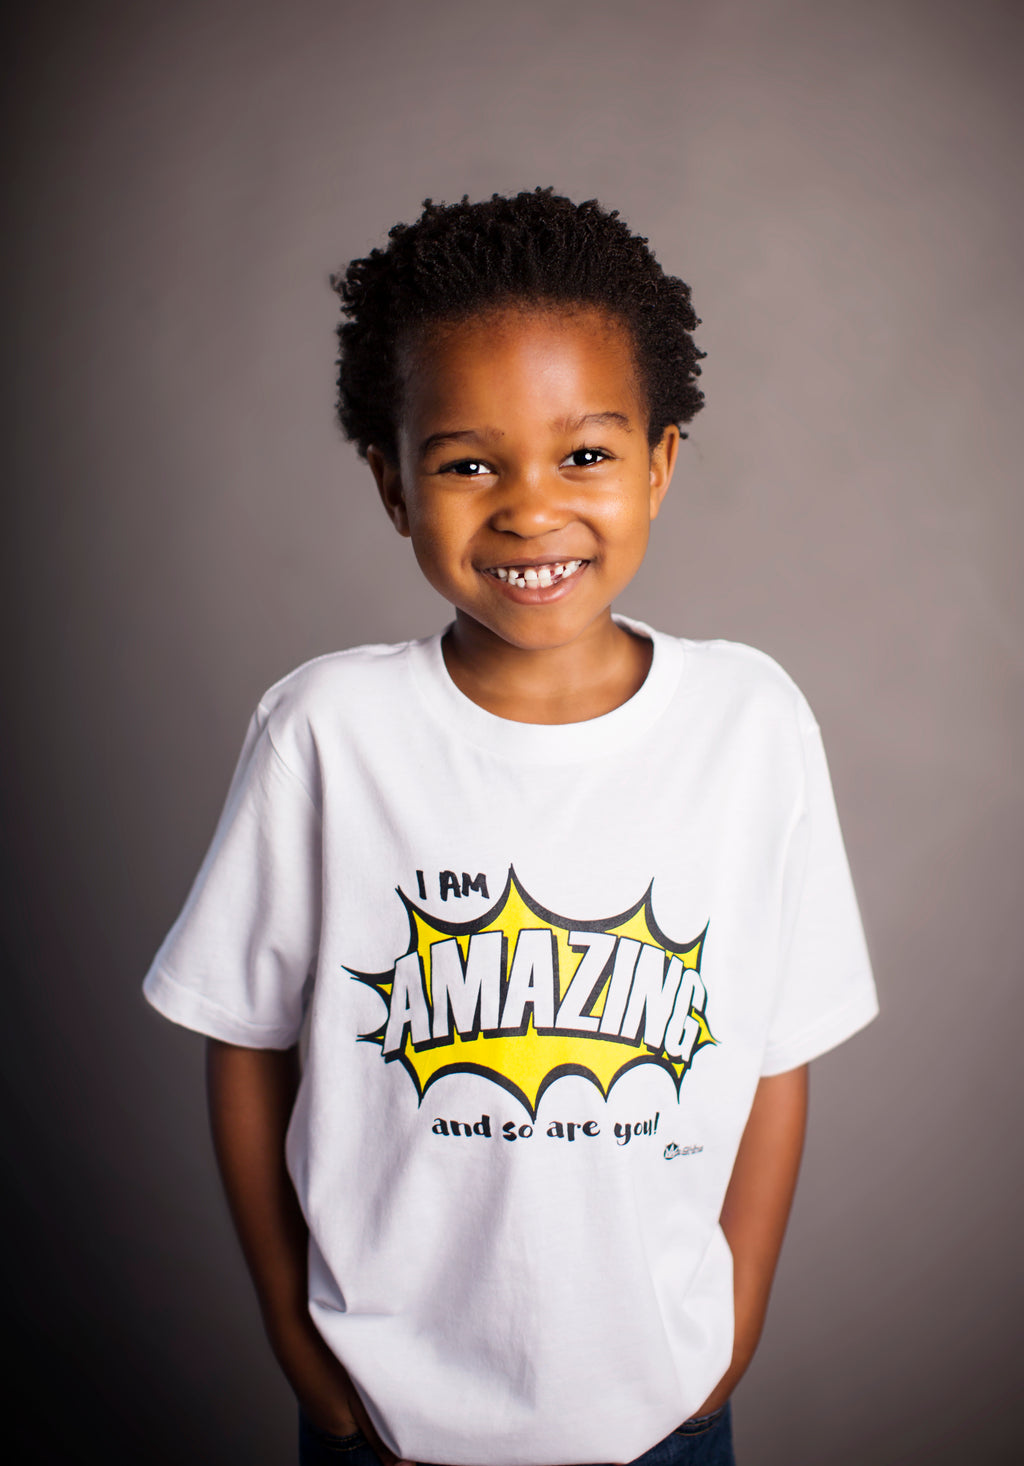 I Am Amazing (and so are you!) - Short Sleeve Tee